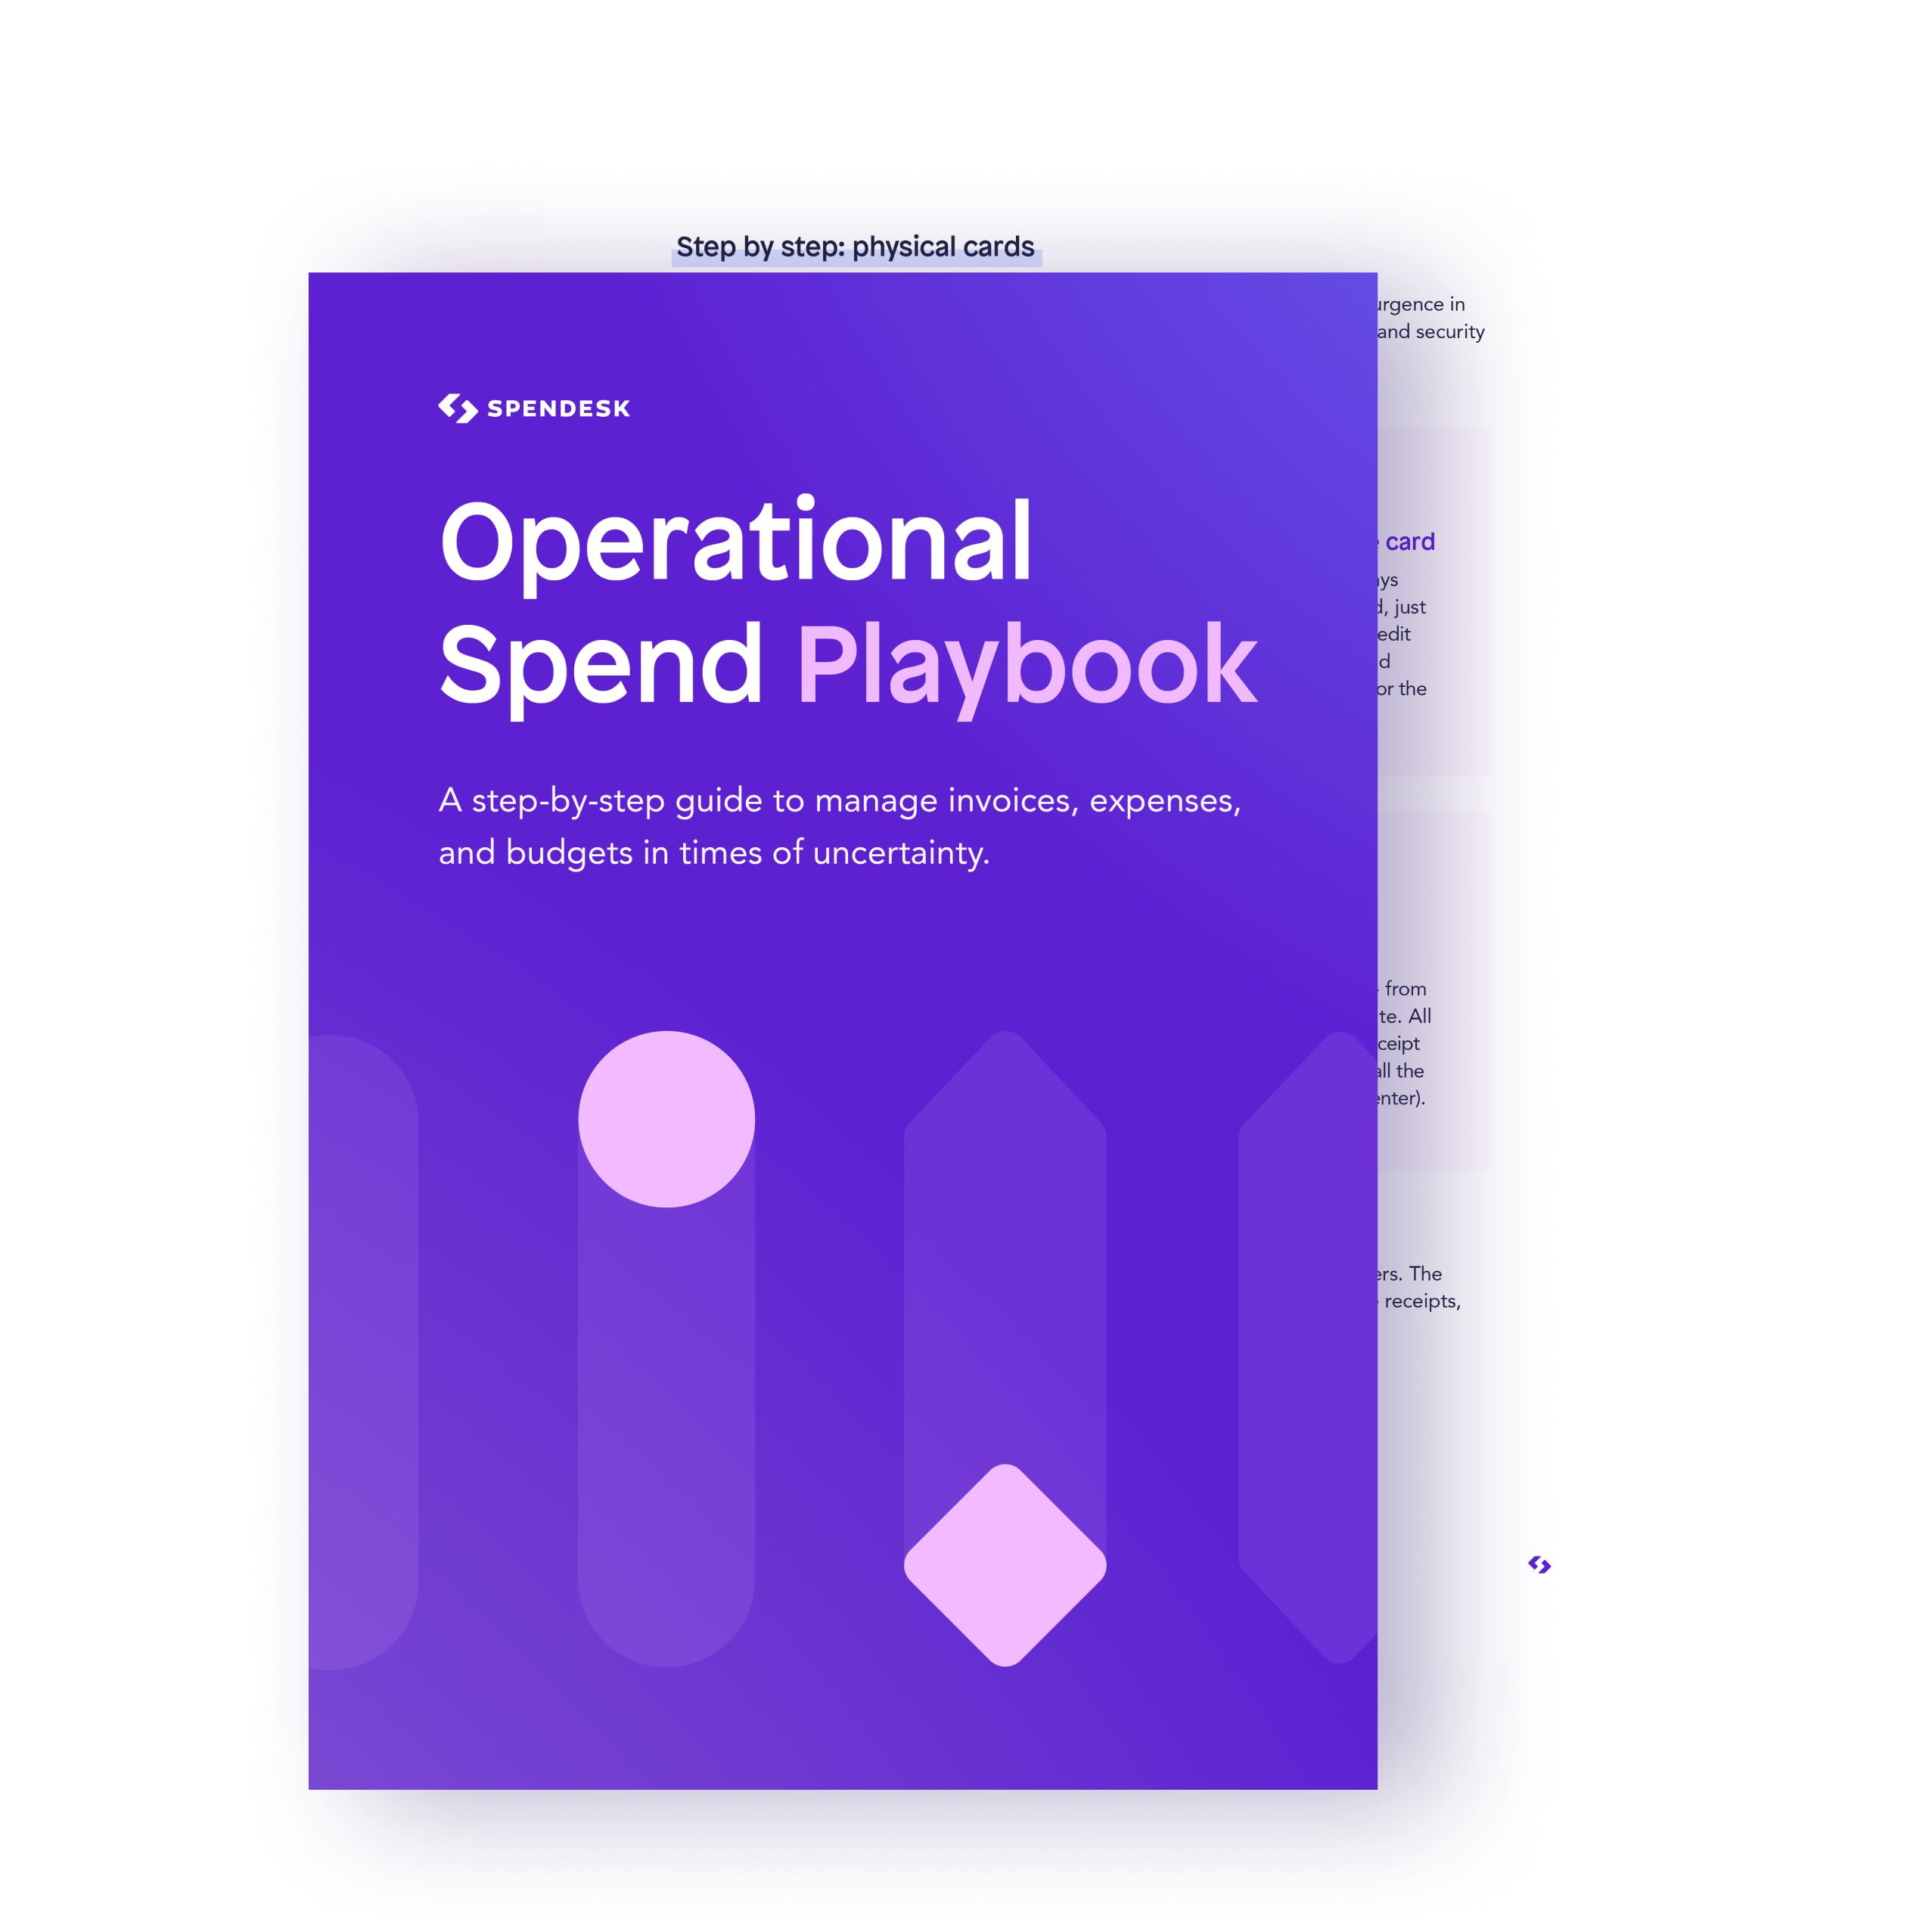 Operational_spend_playbook_cover_EN